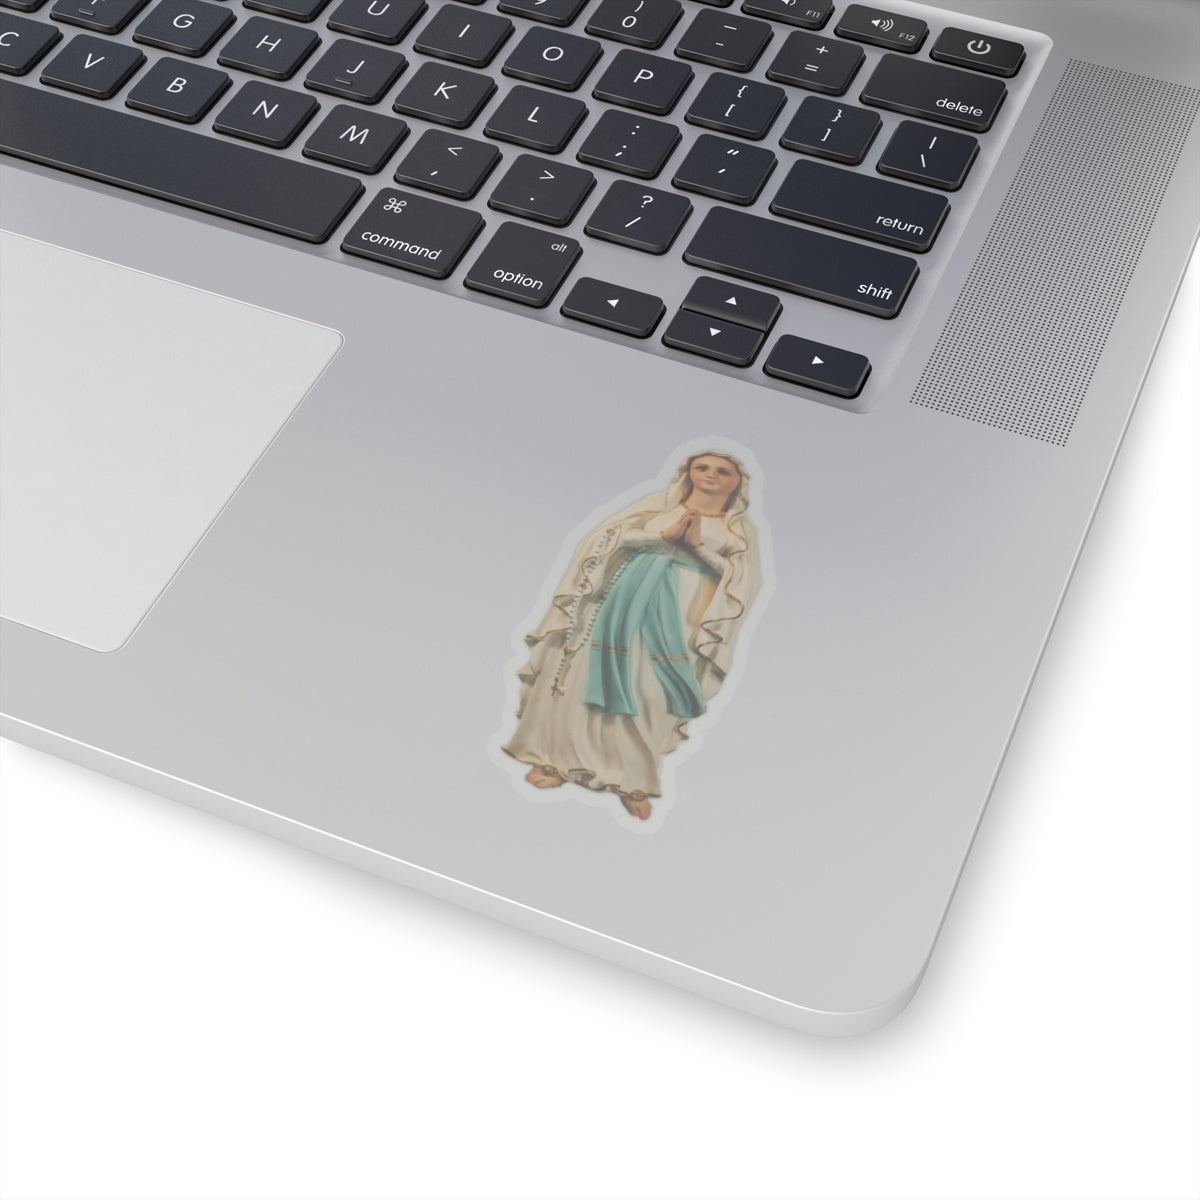 Our Lady of Lourdes Kiss-Cut Stickers